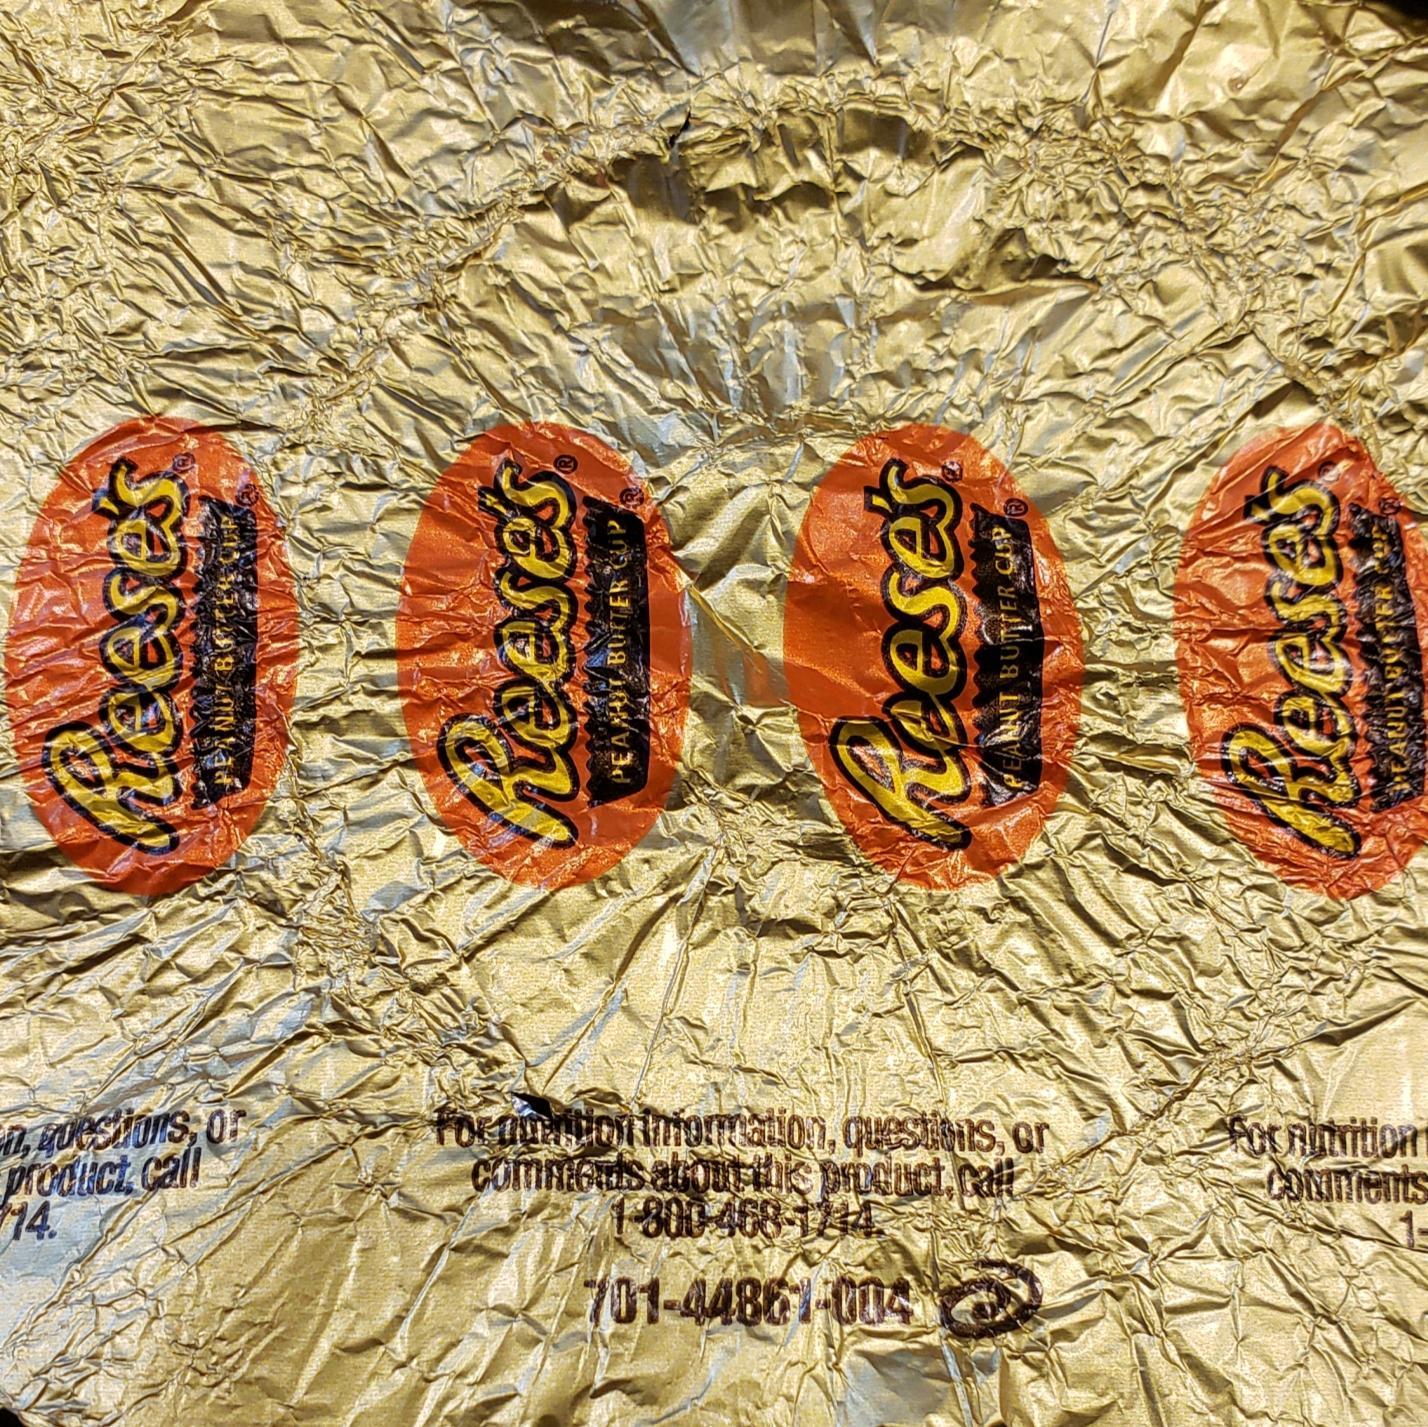 Yellow Swirl Logo - Yes, I know it's a Reese's wrapper. What does the number and swirl